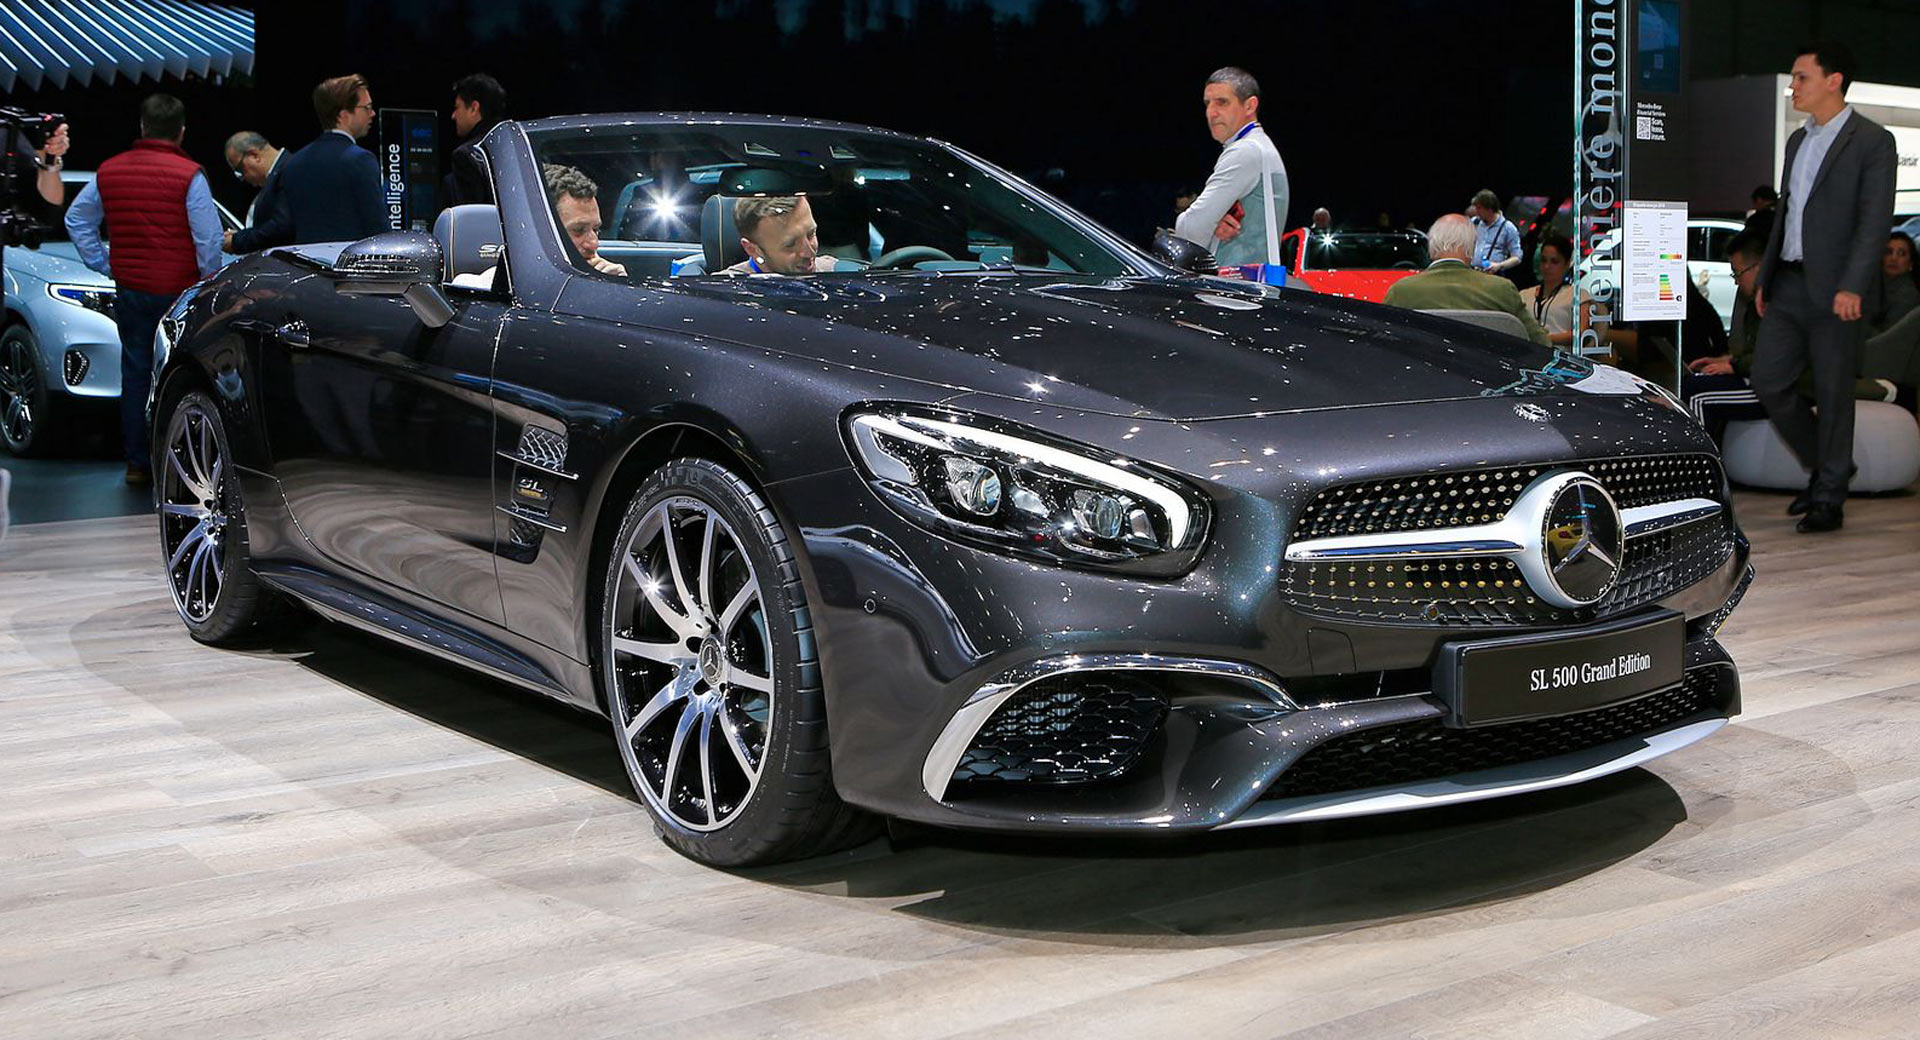 2020 Mercedes Benz Sl 500 Grand Edition Is For The Classy Buyer